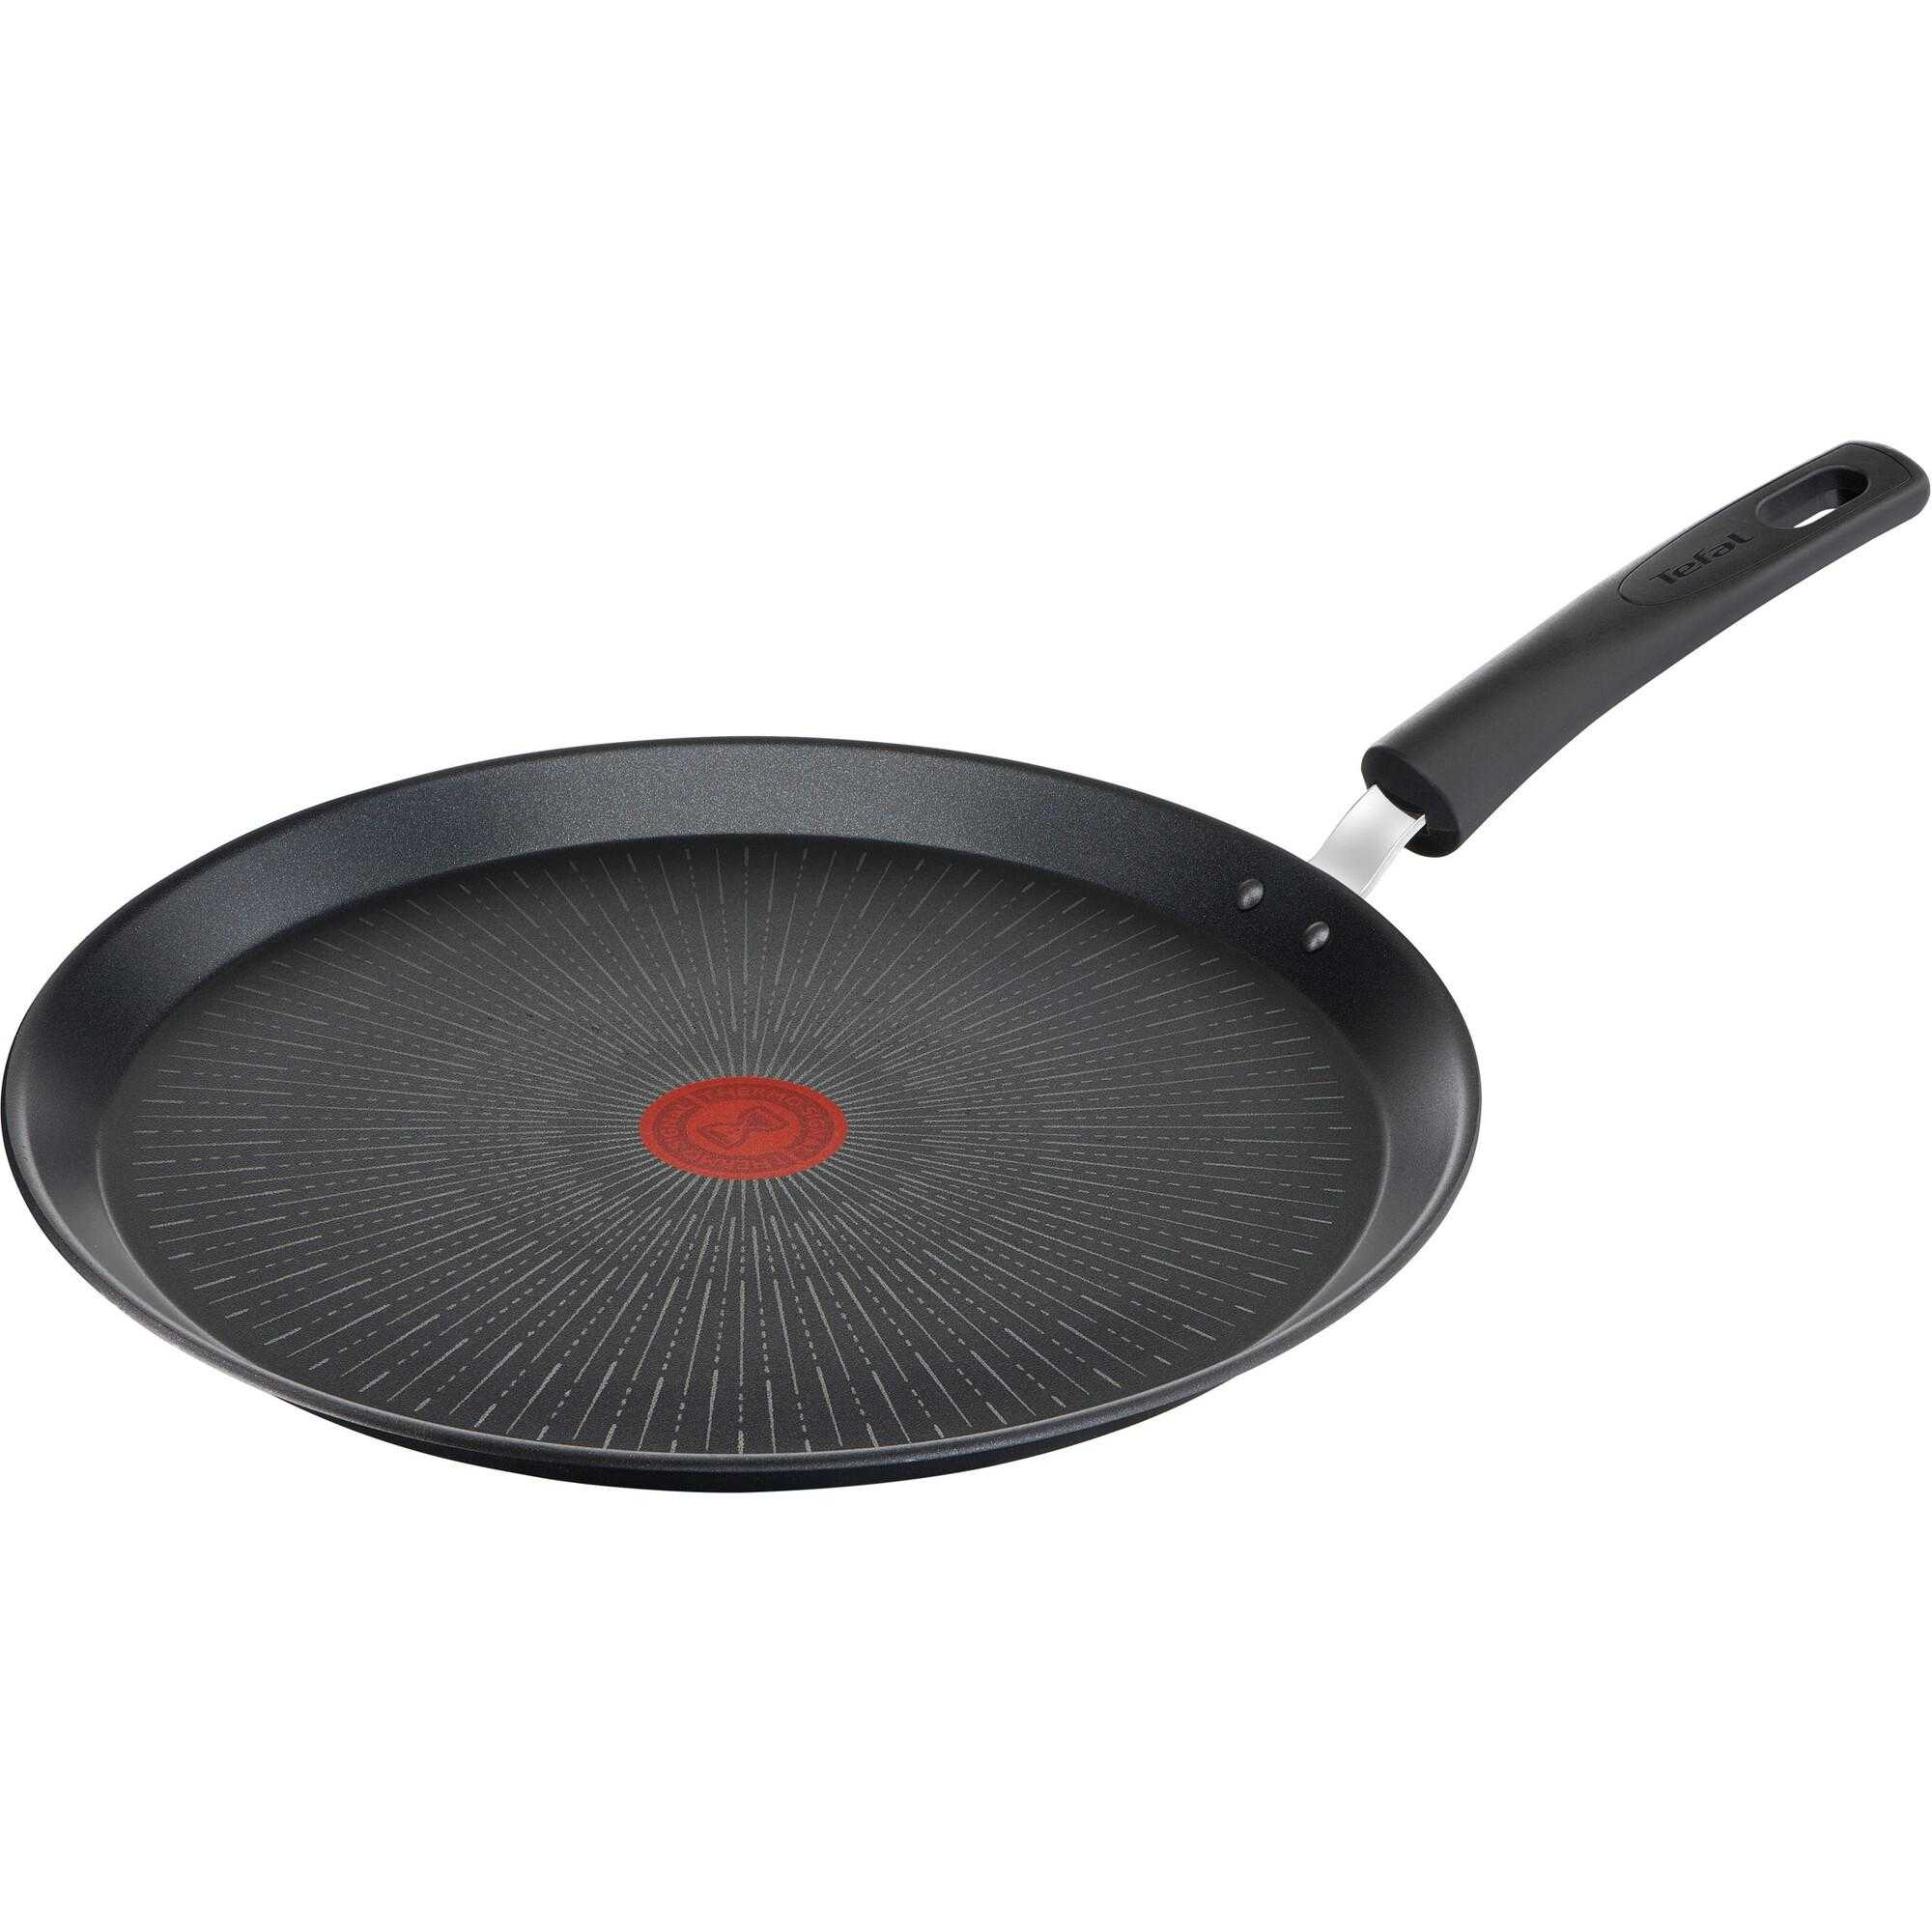 Tigaie clatite, cu maner, Tefal Unlimited G2553872, 25 cm, indicator Thermo Signal, inductie